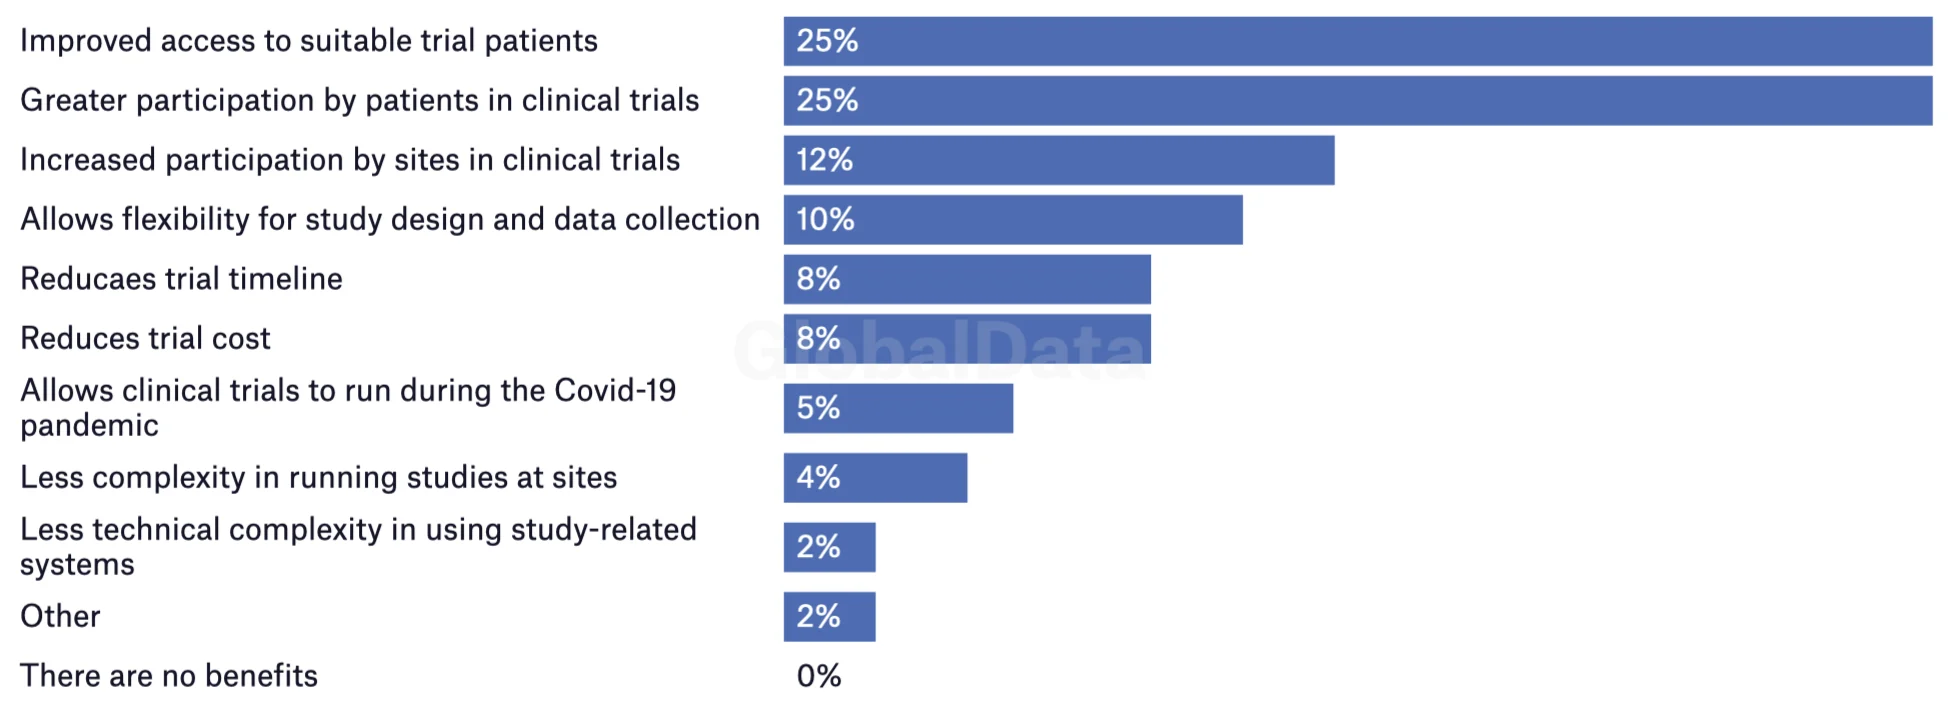 Perceived benefits of decentralised trials for future users
Survey fielded June 29 2022 to July 28 2022